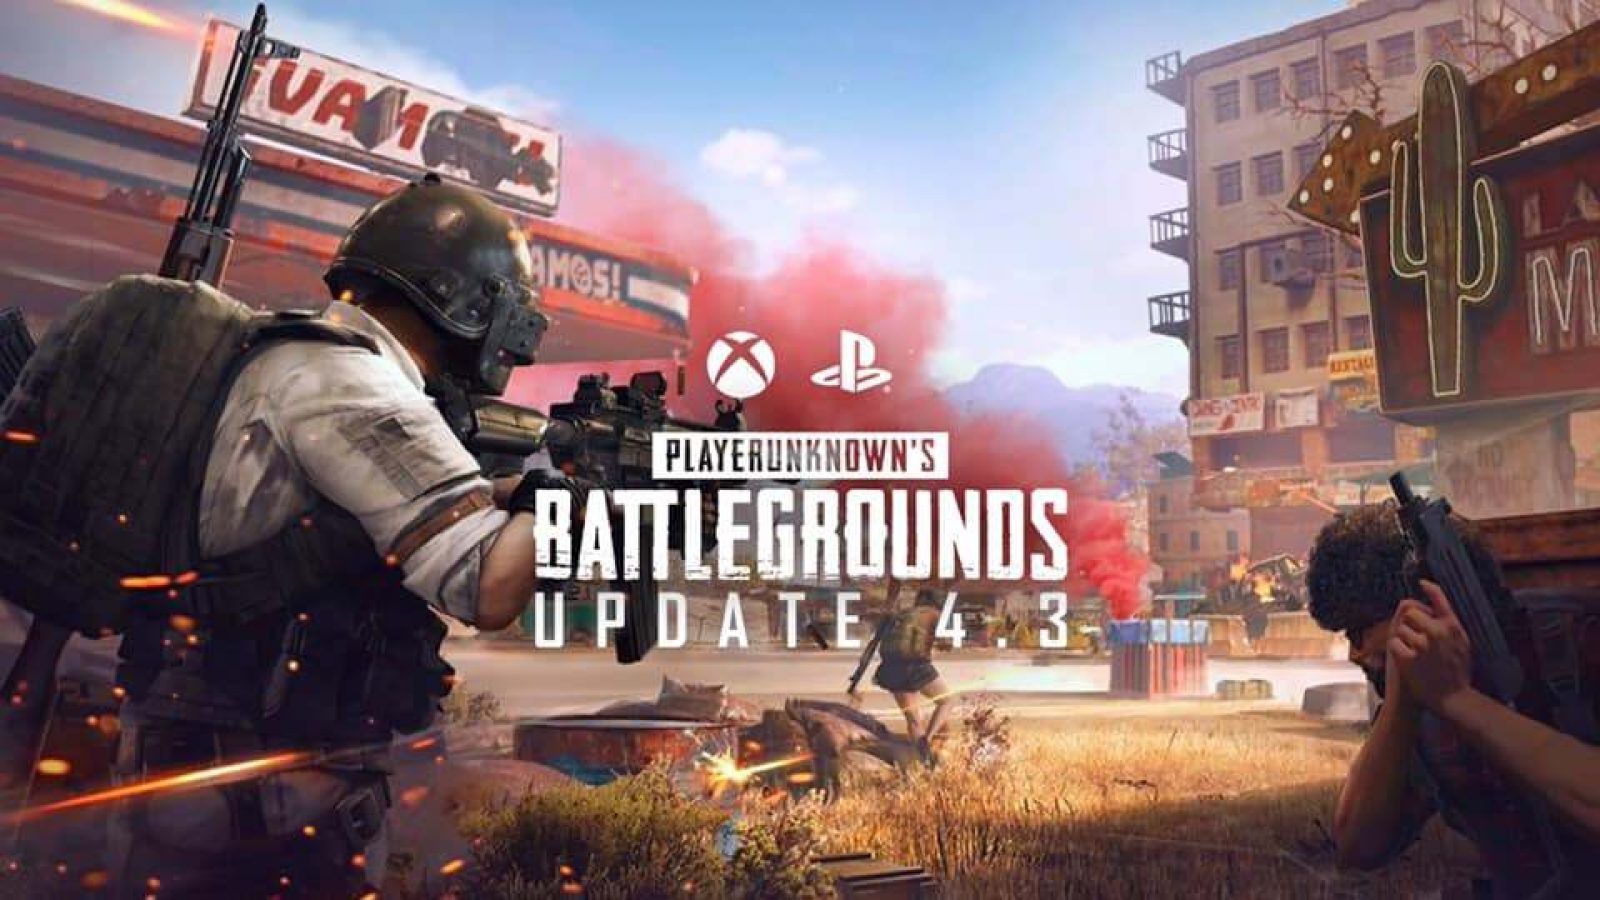 PUBG console update 4.3 patch notes live now